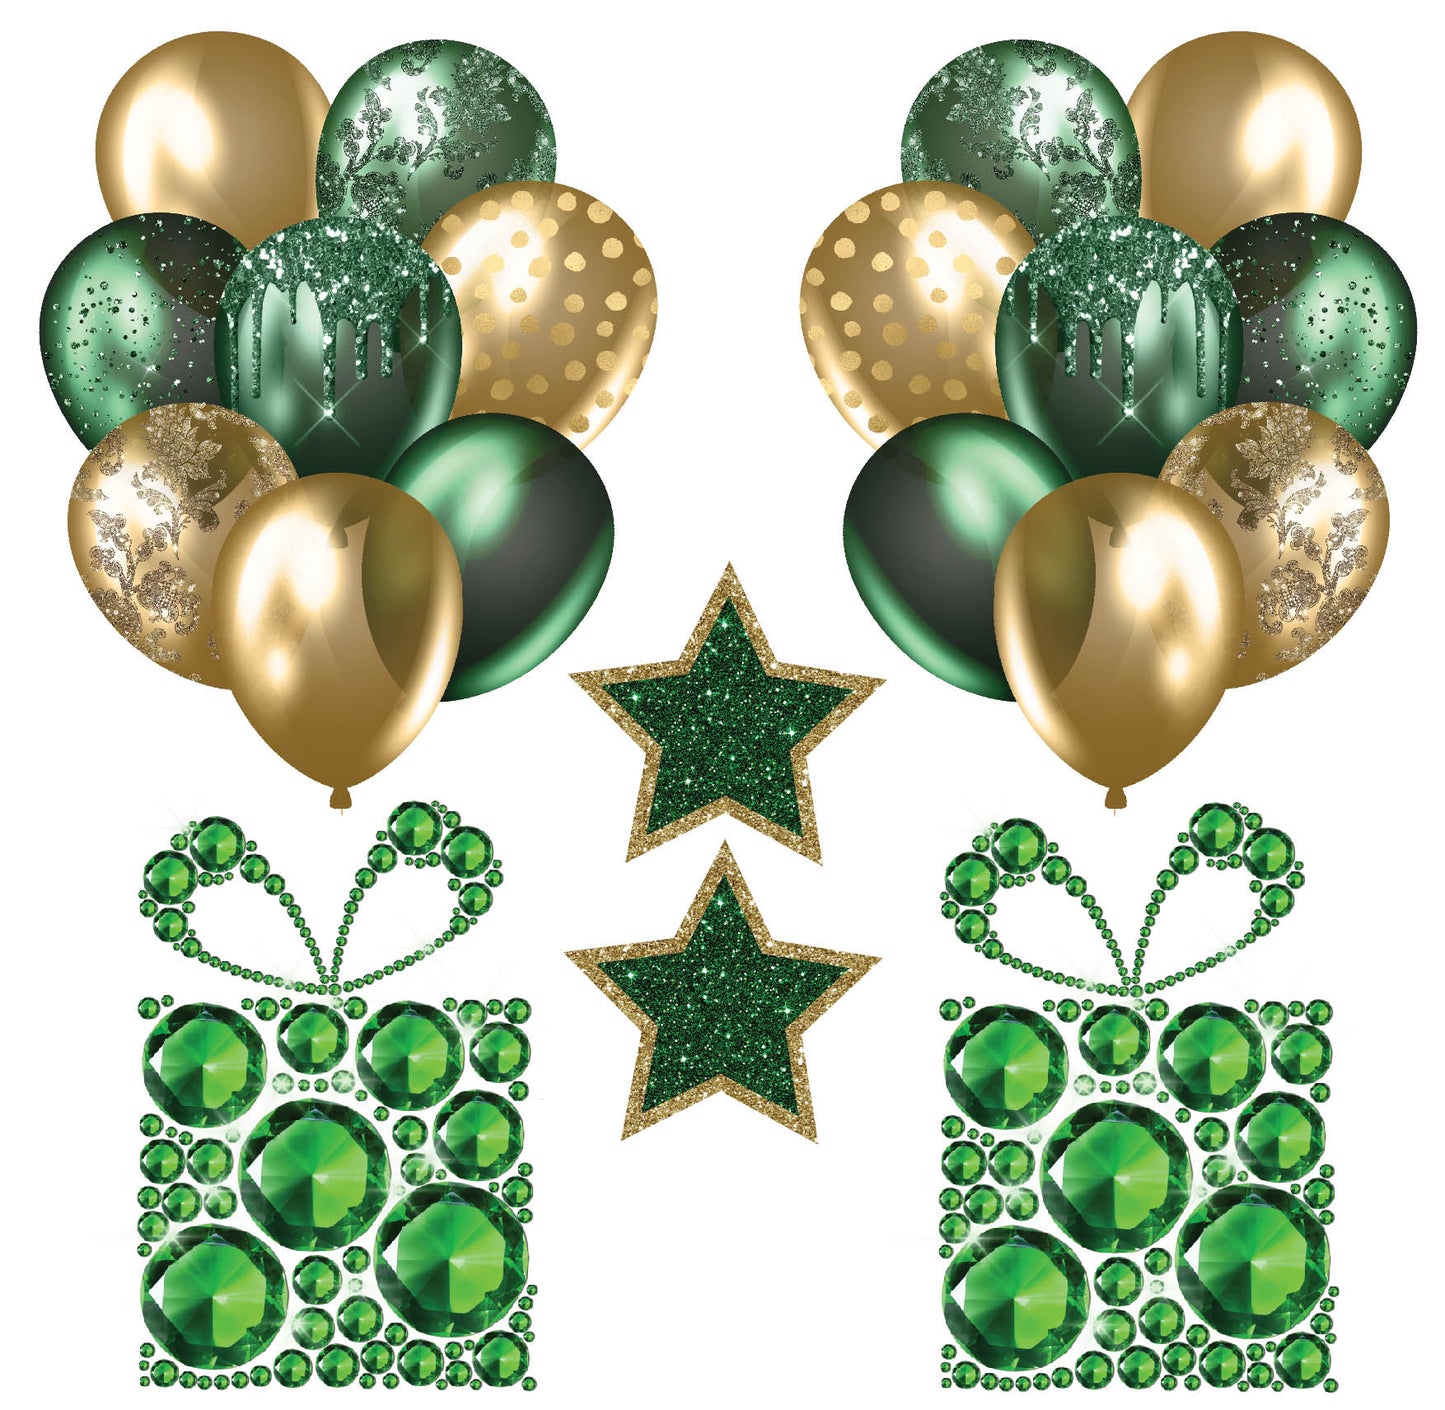 Green and Gold Balloons Set 3 Half Sheet (Must Purchase 2 Half sheets - You Can Mix & Match)